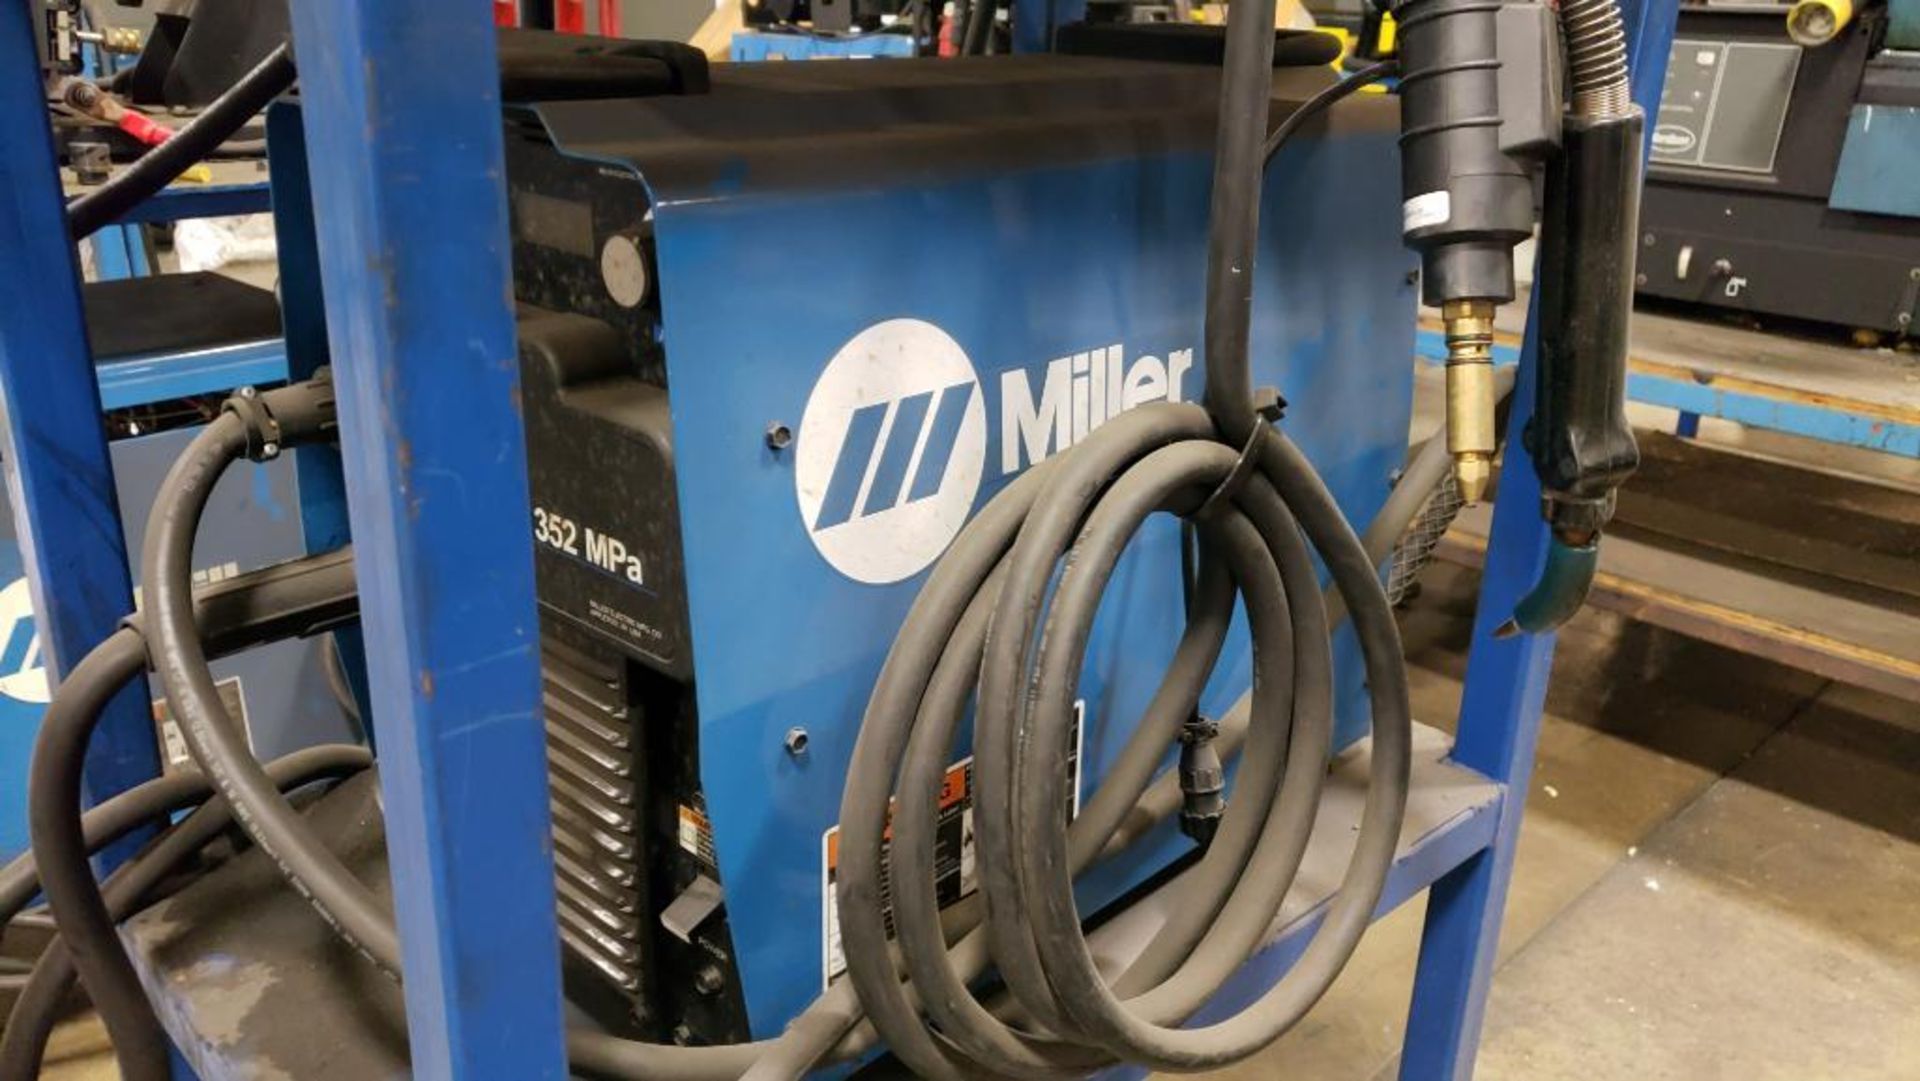 Miller Invision 352 MPa auto-line w/ Miller S-74 MPa Plus wire feeder welding system. - Image 2 of 15